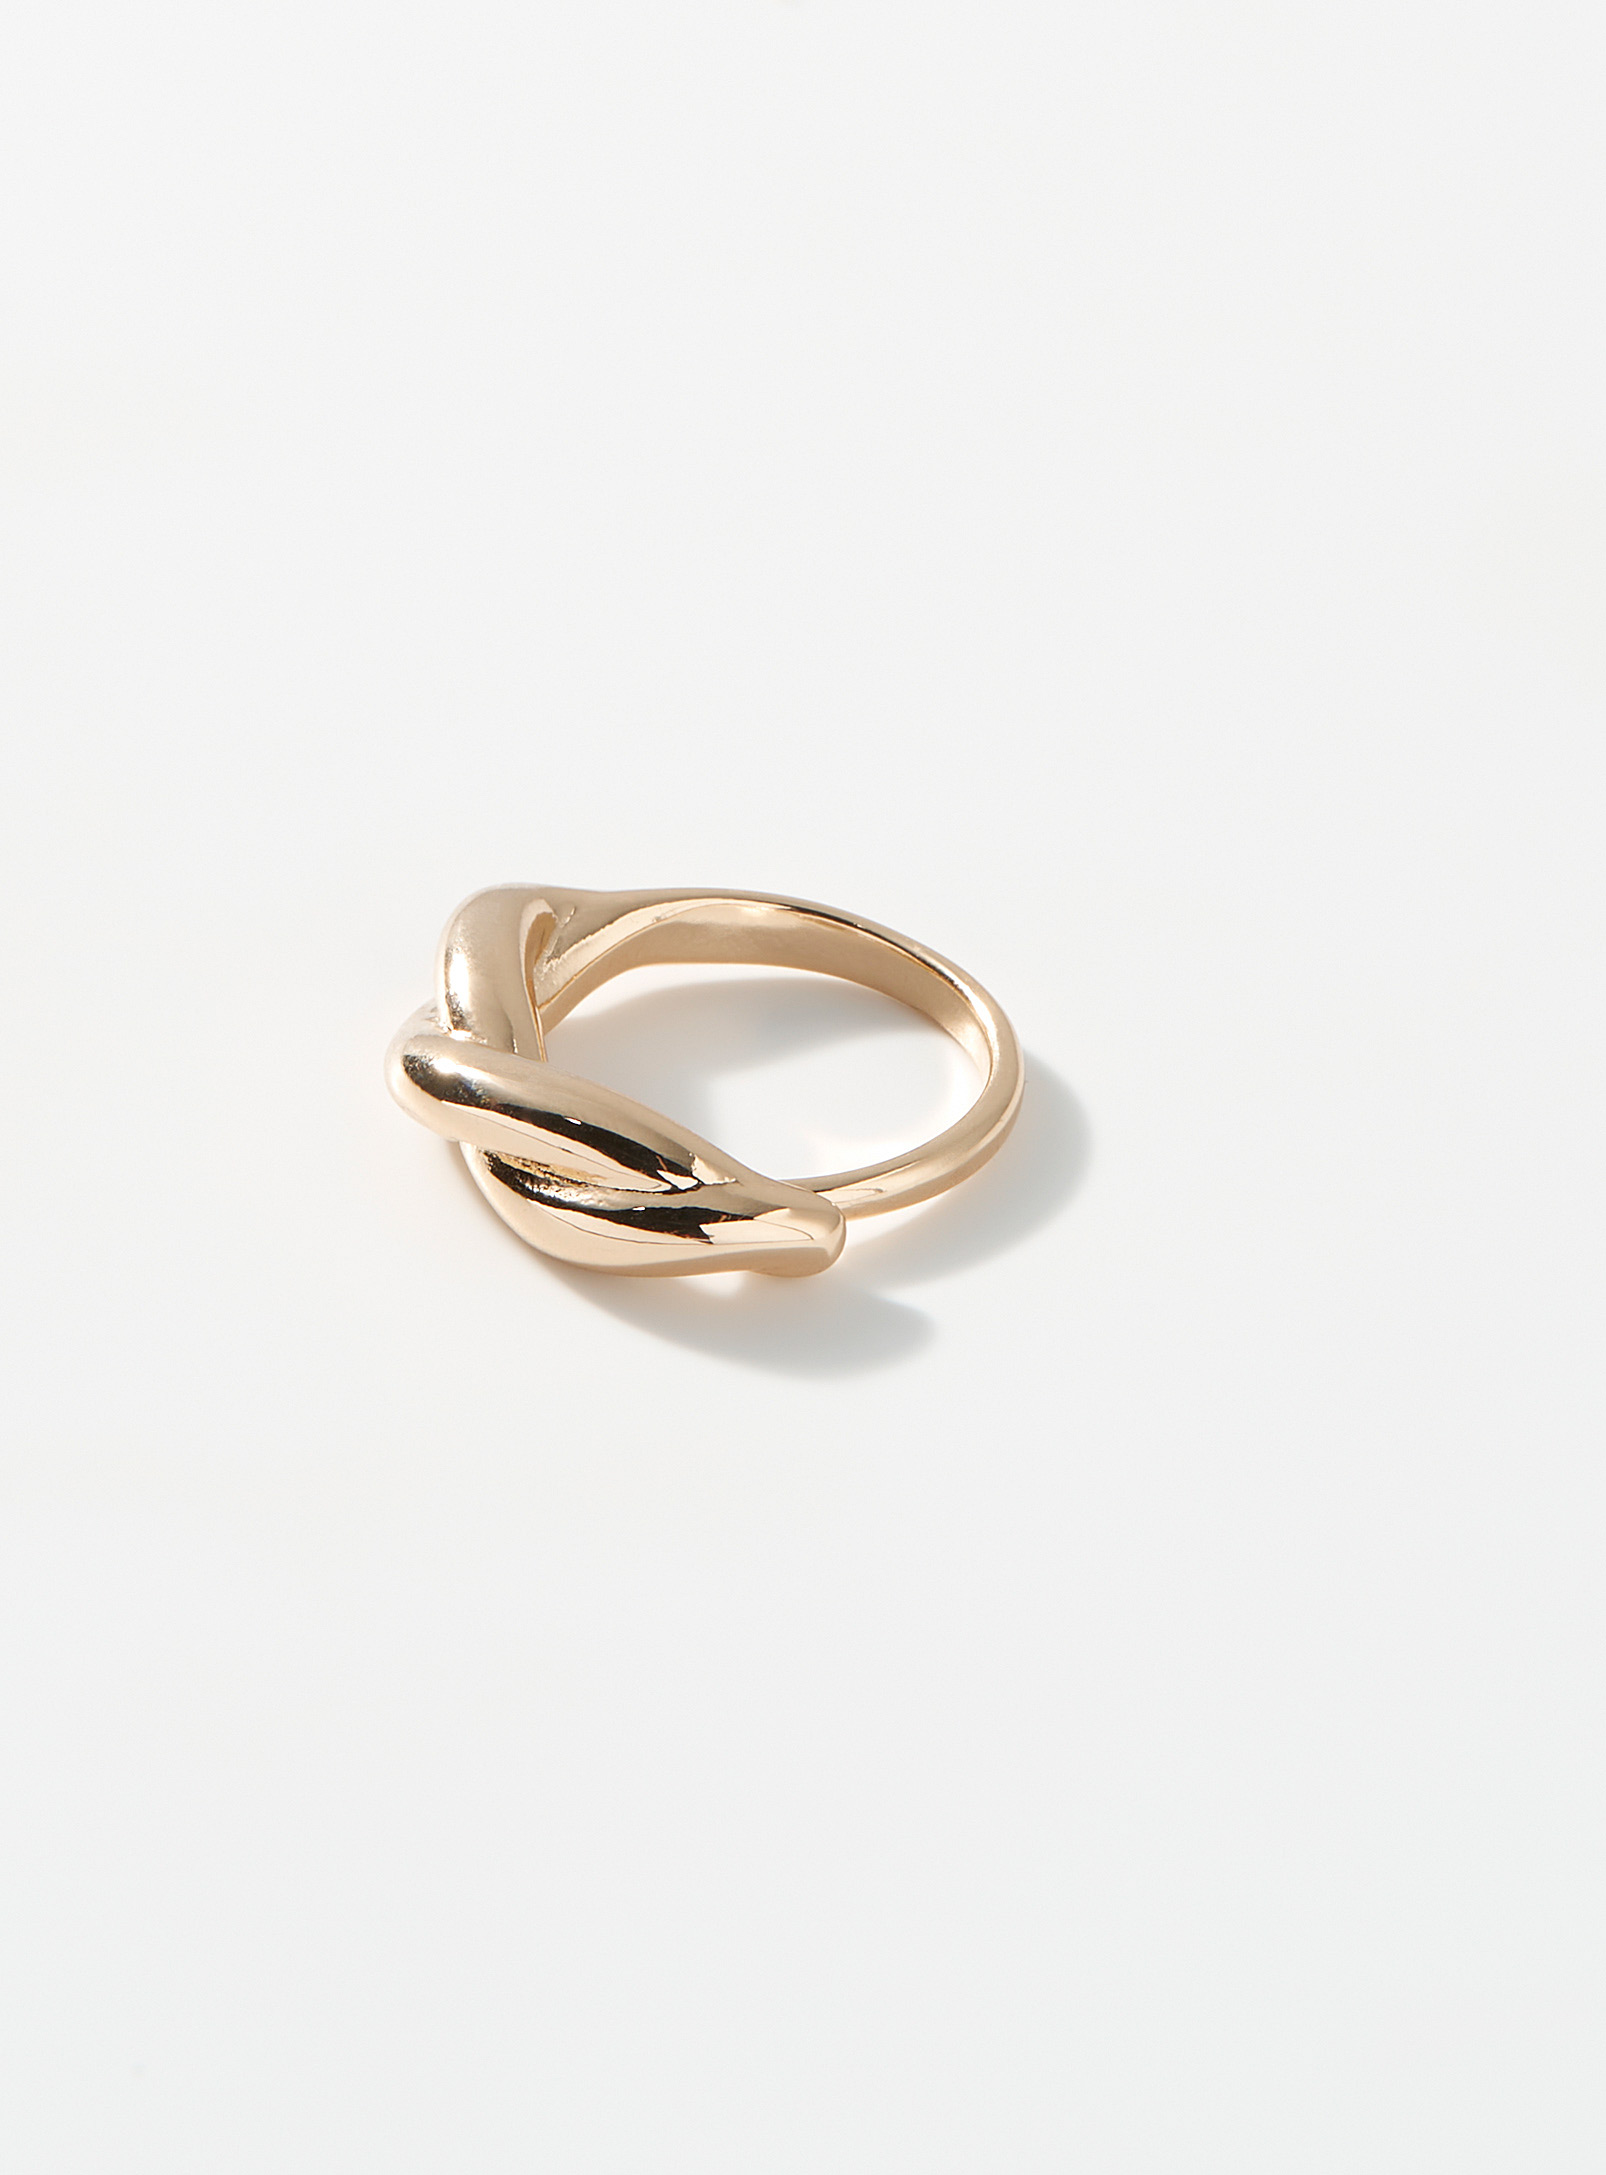 Simons - Women's Twisted silhouette ring